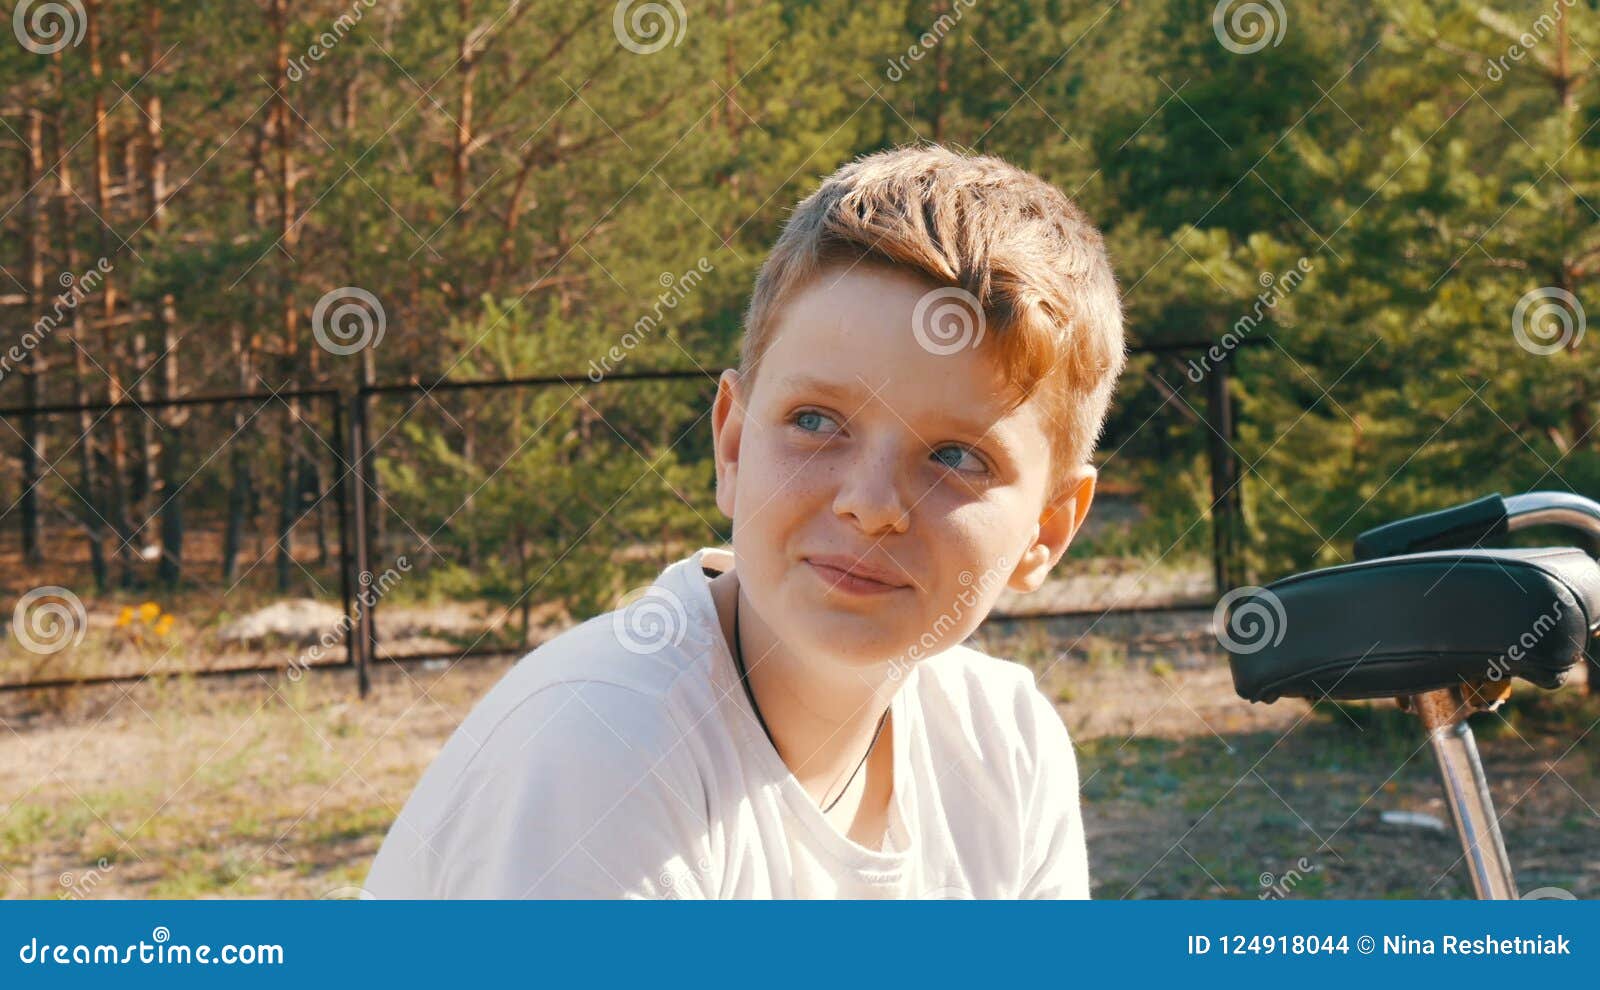 Cute Blonde With Blue Eyes A Teenager Boy Sits And Smile In A Park